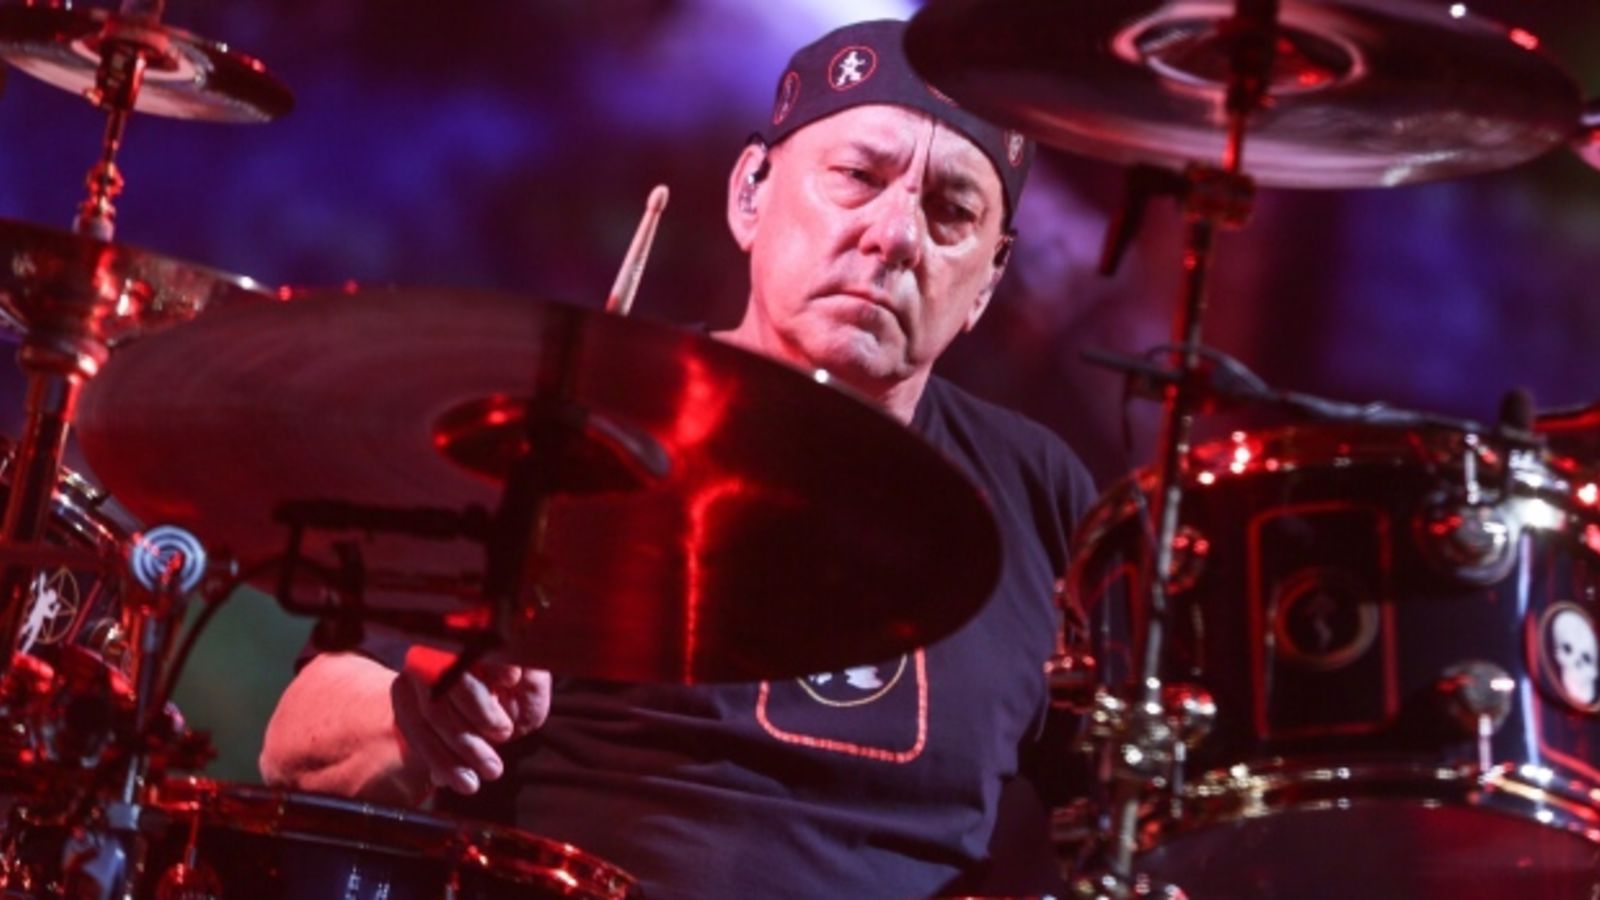 Illustration for article titled RIP Neil Peart